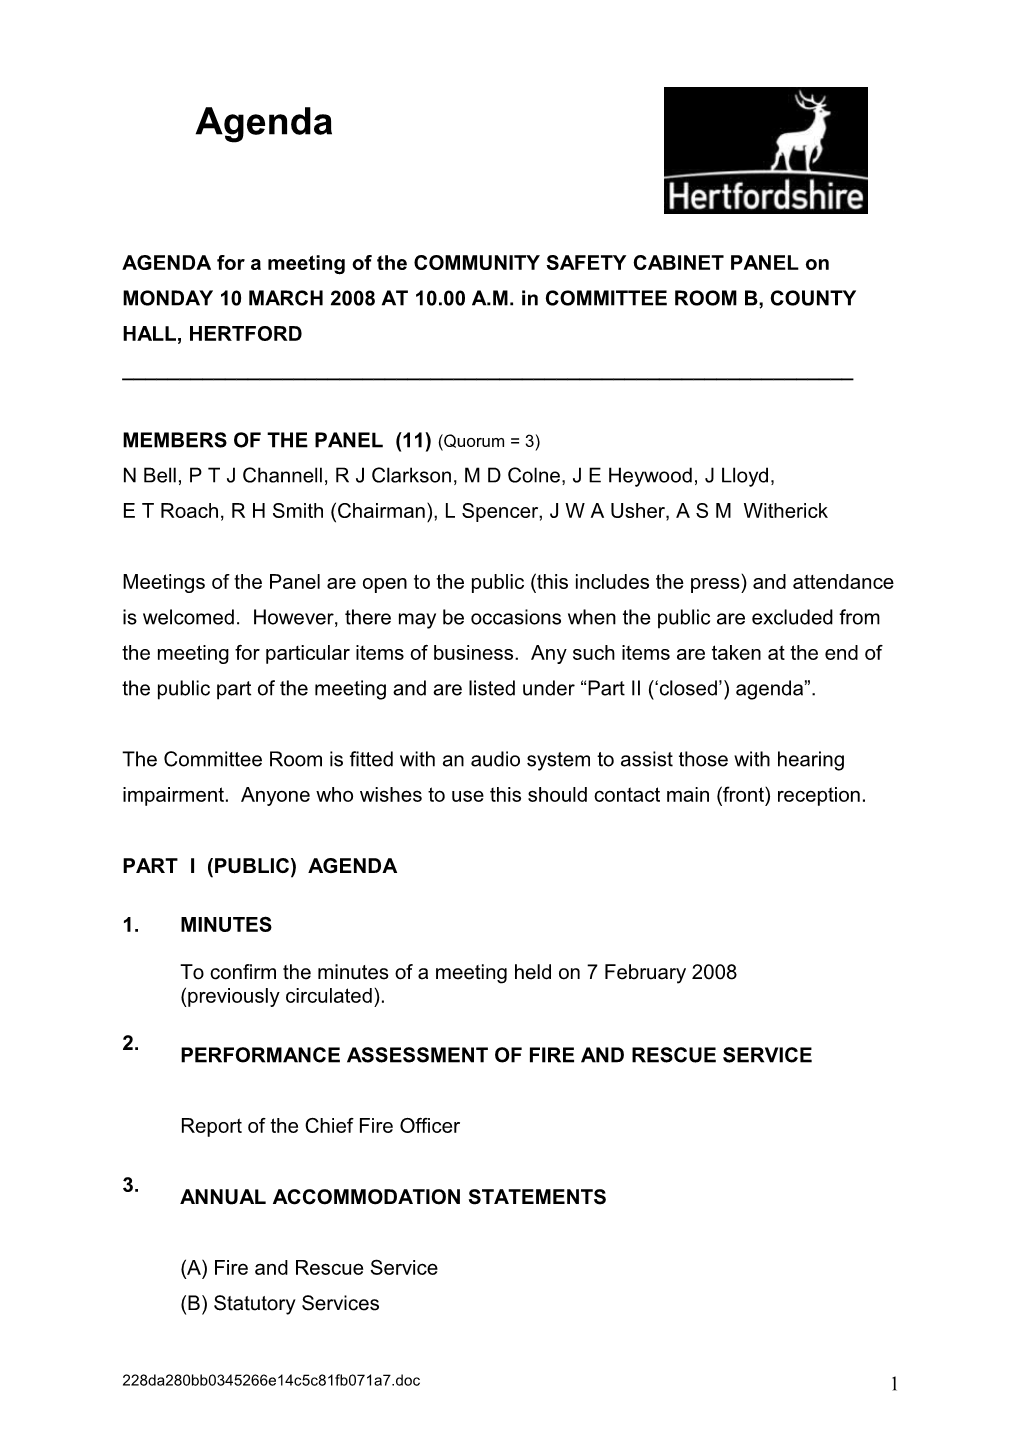 AGENDA for a Meeting of the COMMUNITY SAFETY CABINET Panelon